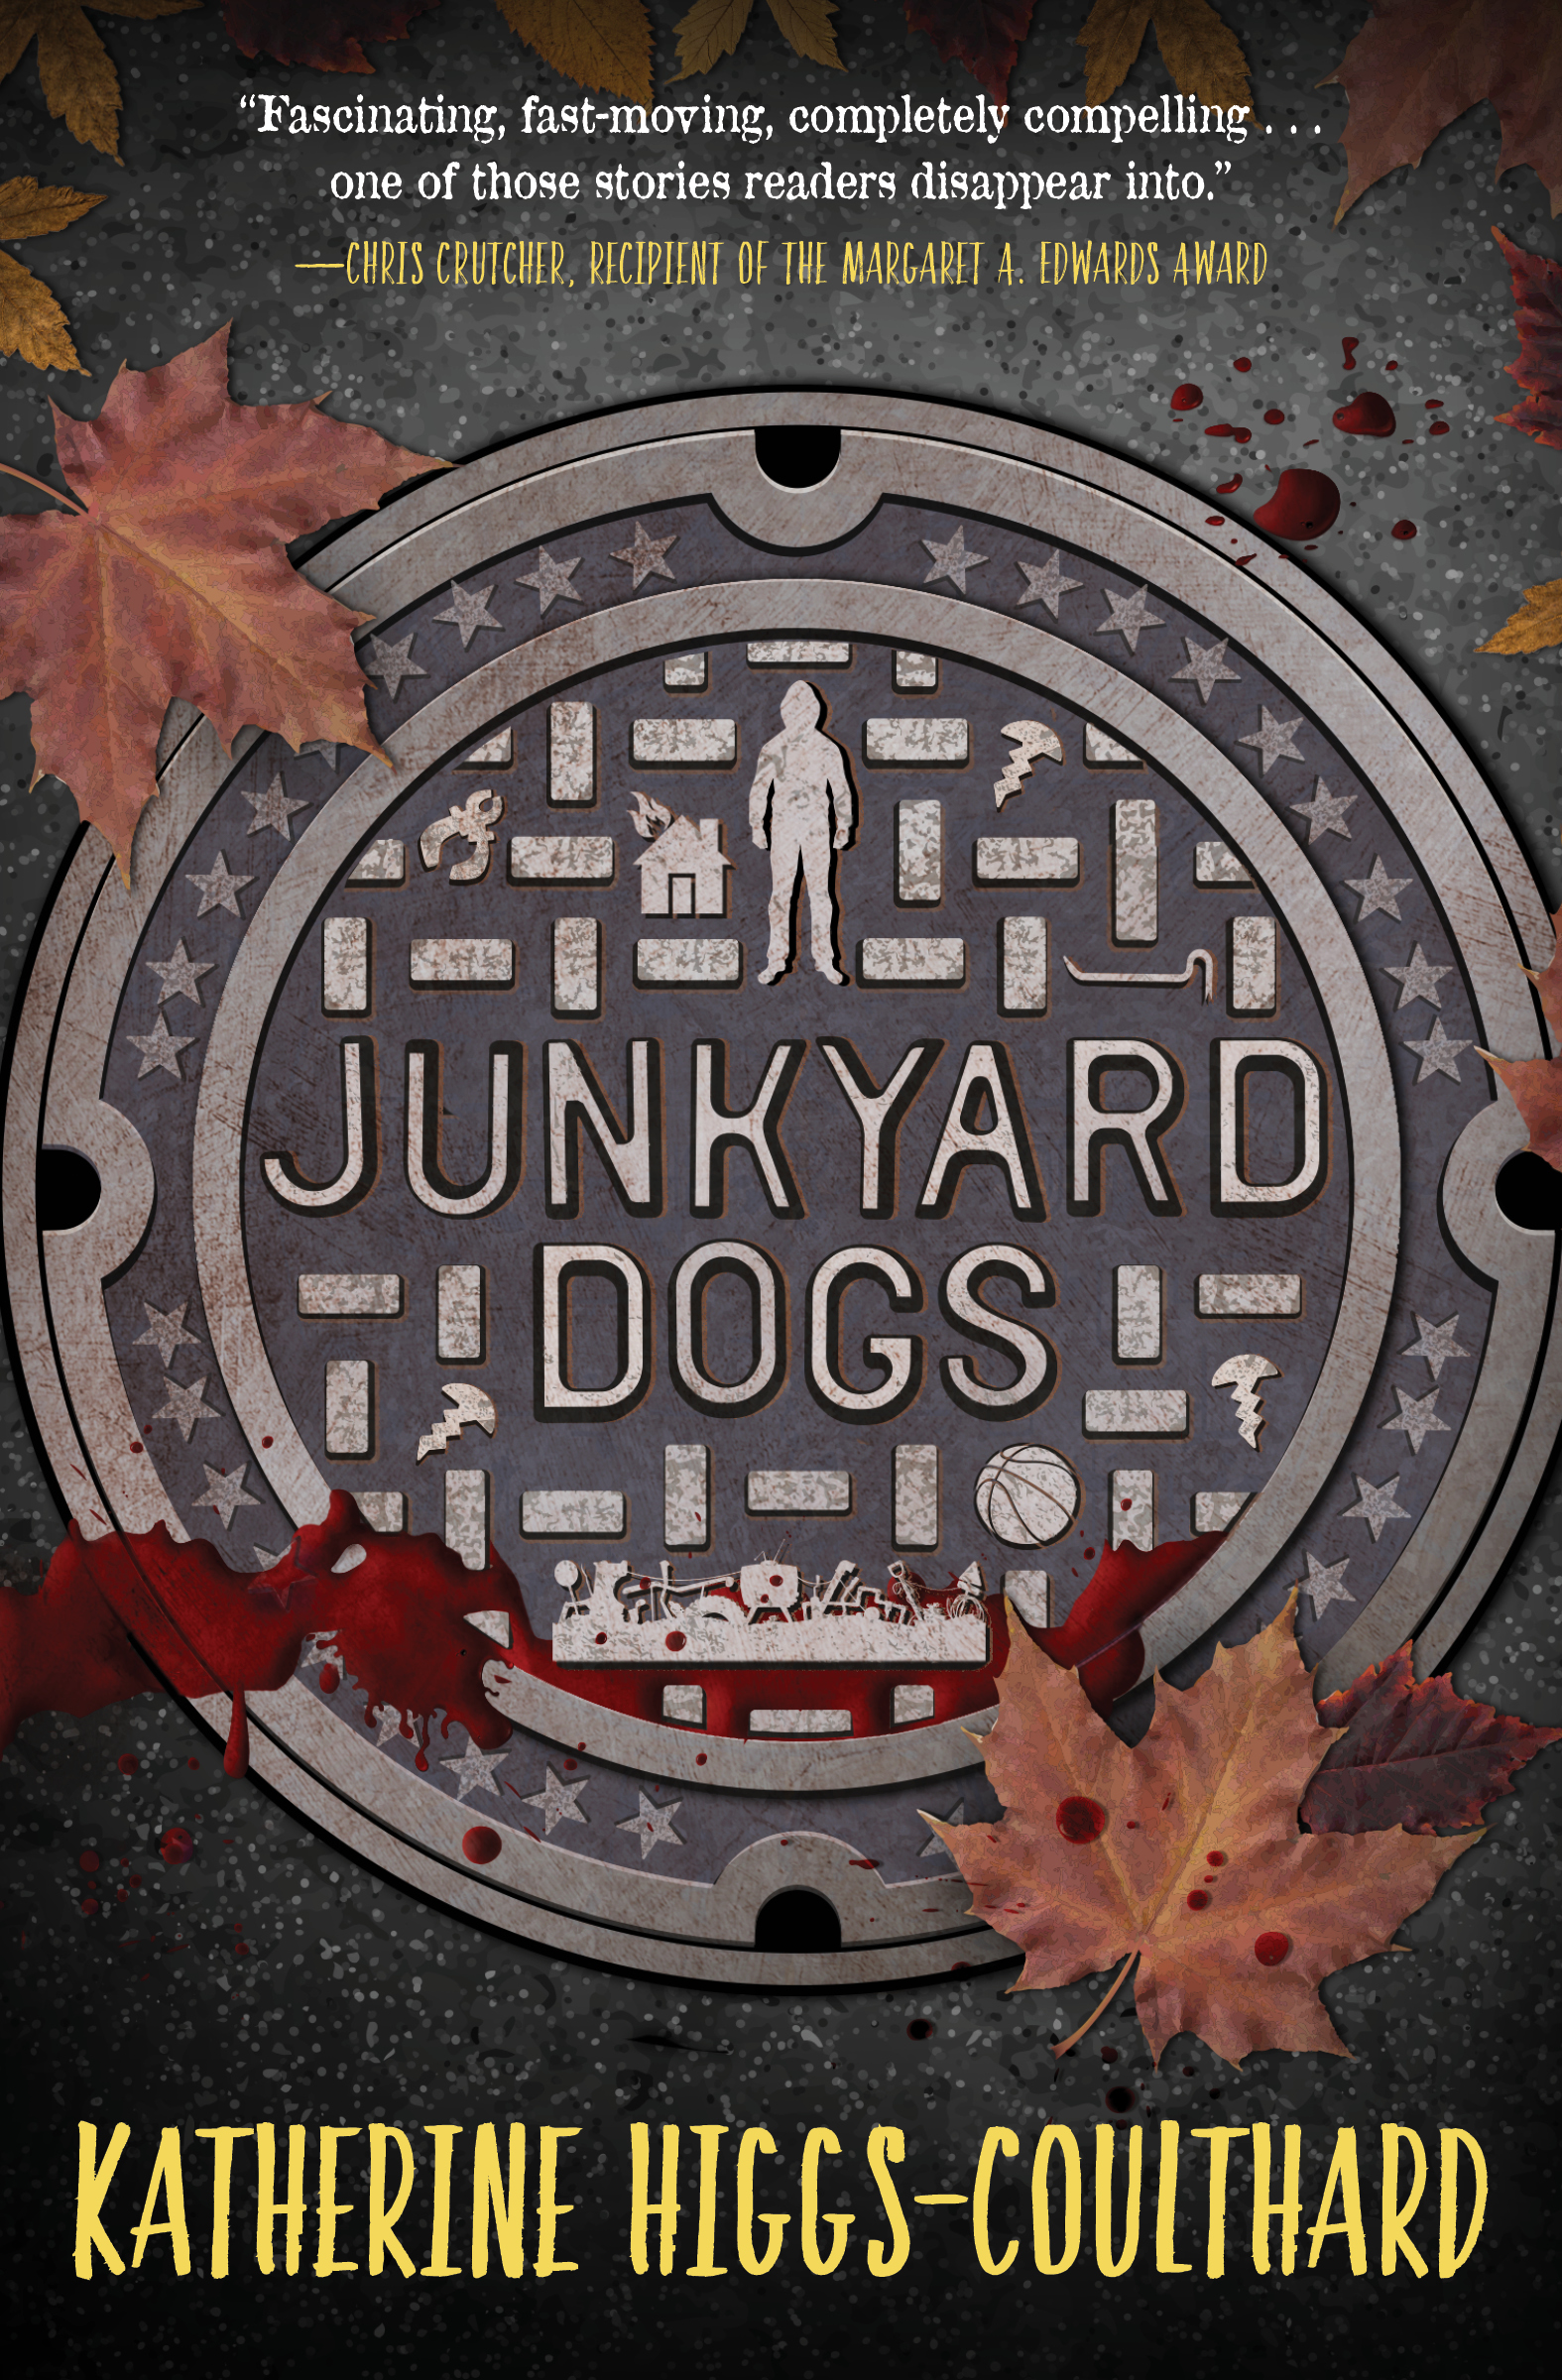 The Half-Truths and Lies in JUNKYARD DOGS, a cover reveal and guest post by Katherine Higgs-Coulthard